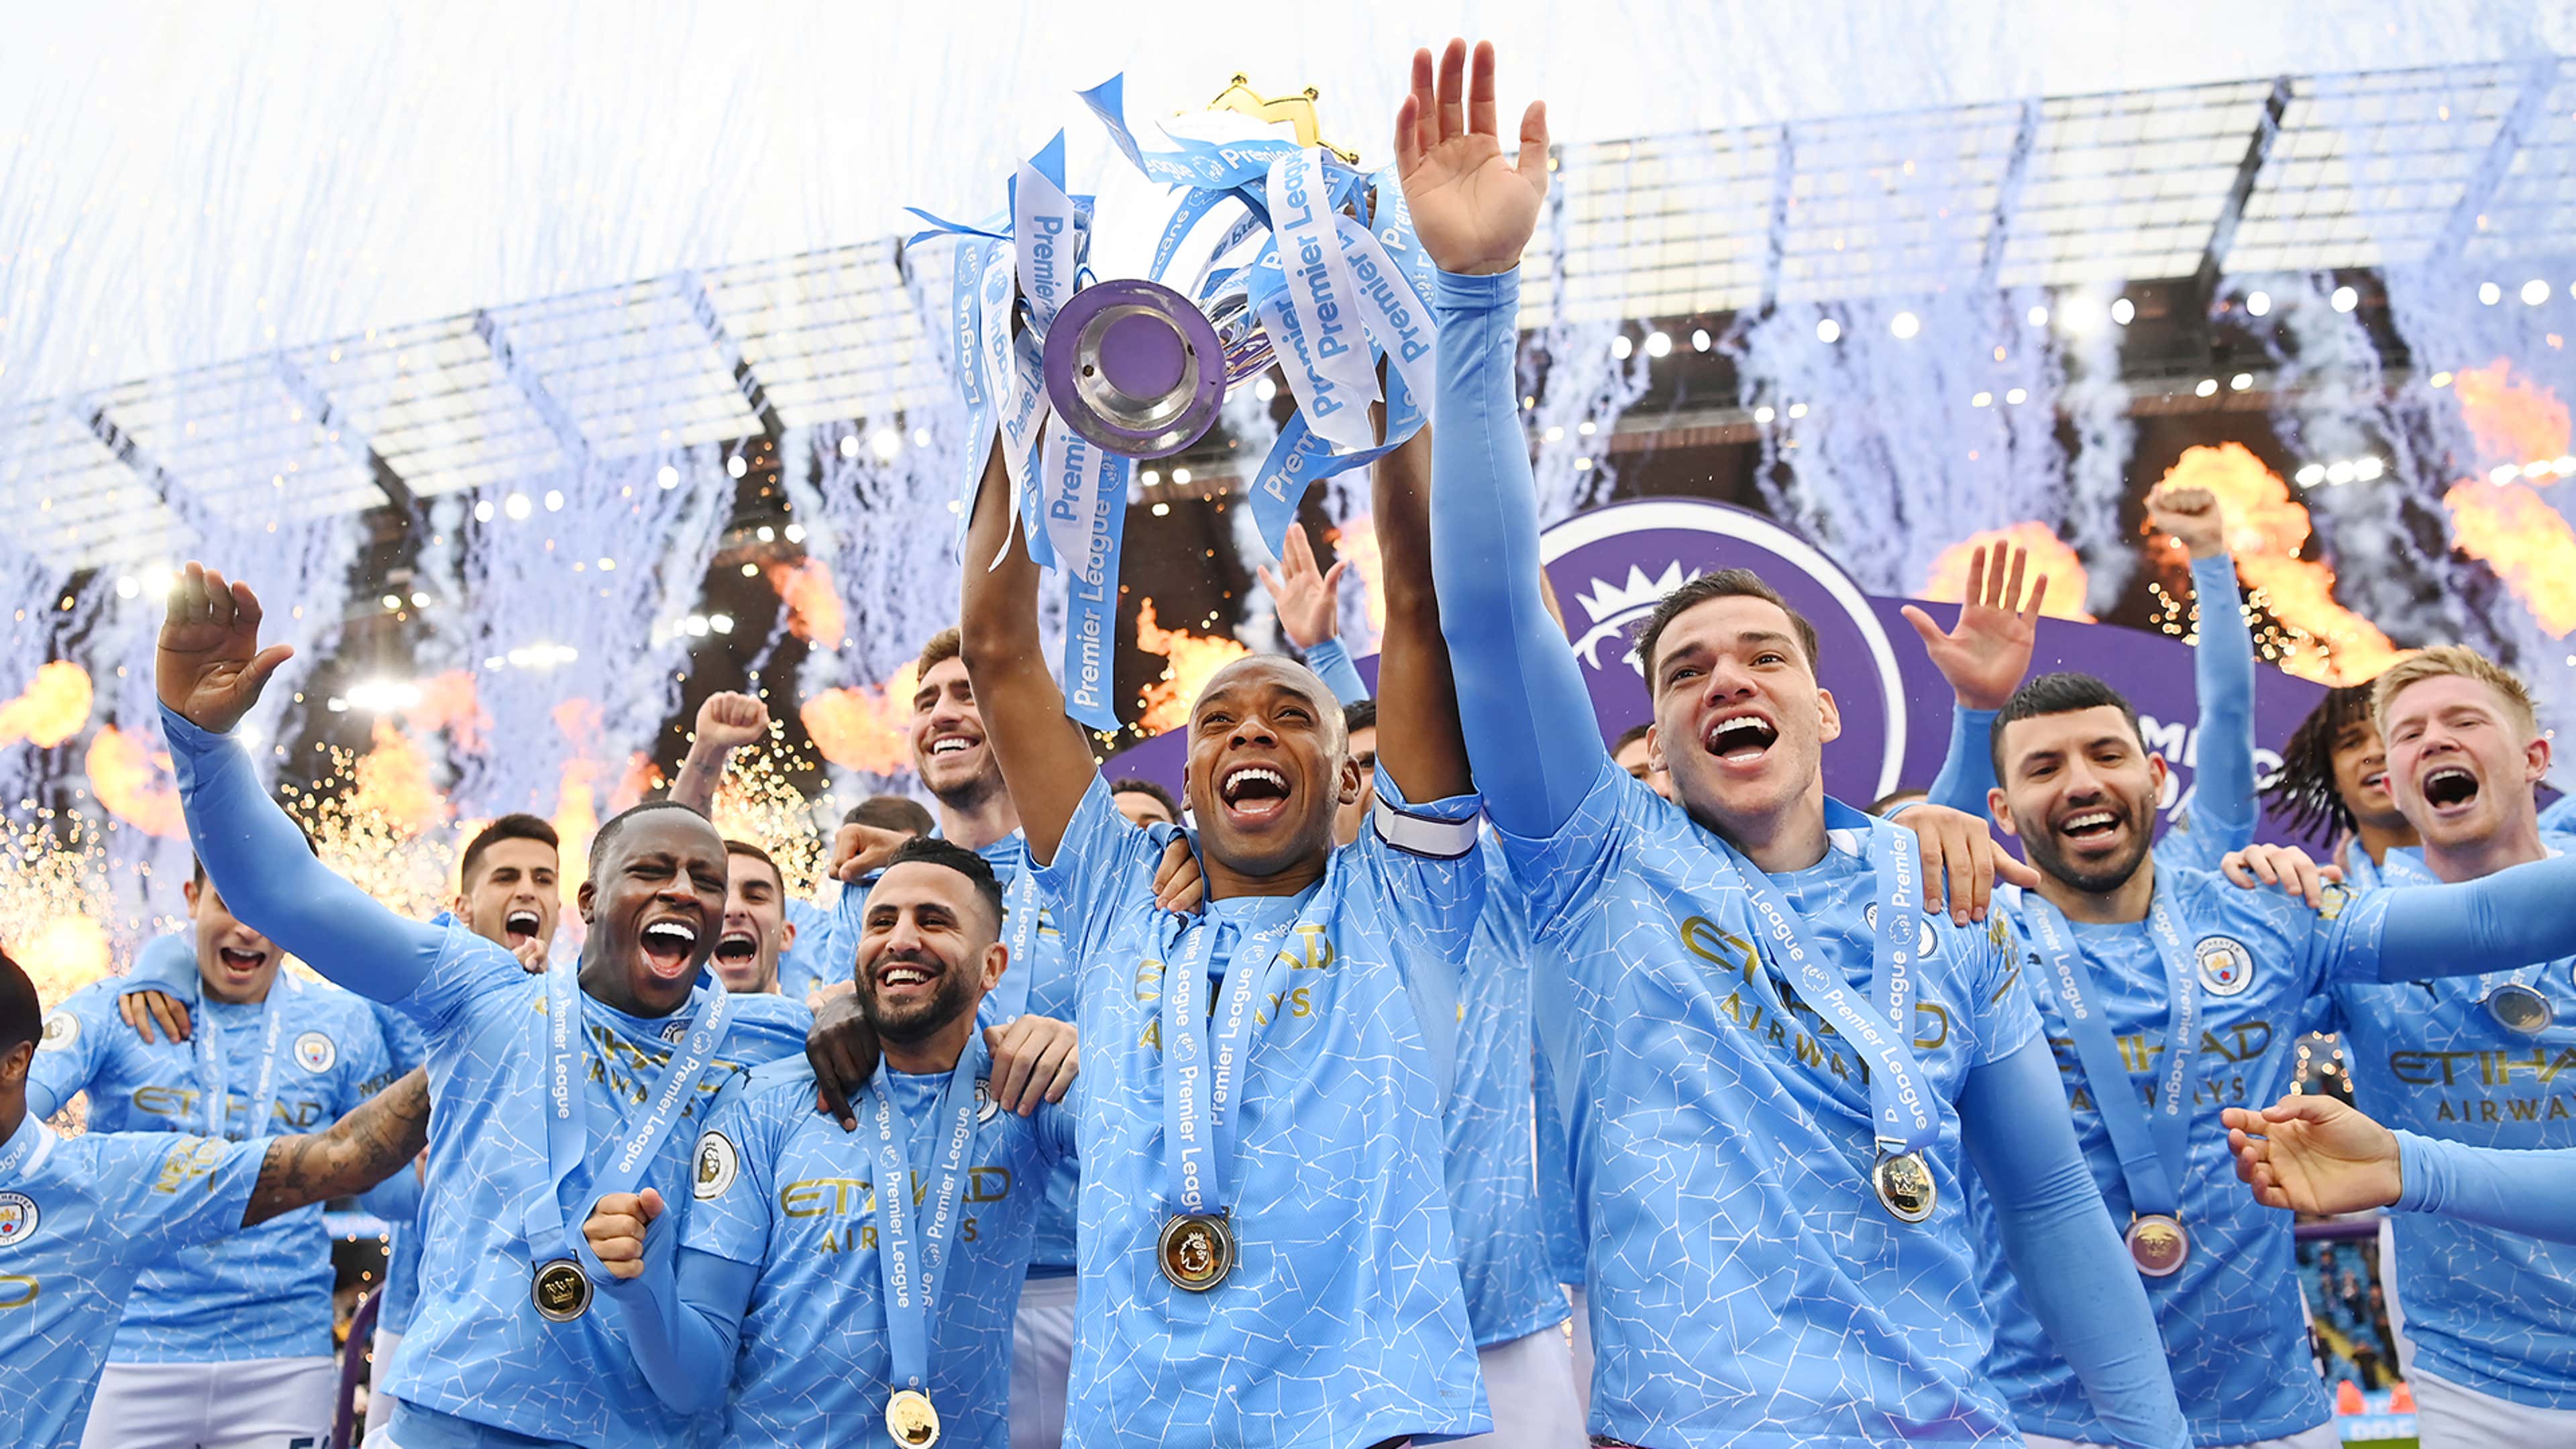 Premier League 2021-22: Manchester City crowned champions after defeating  Aston Villa in dramatic title win